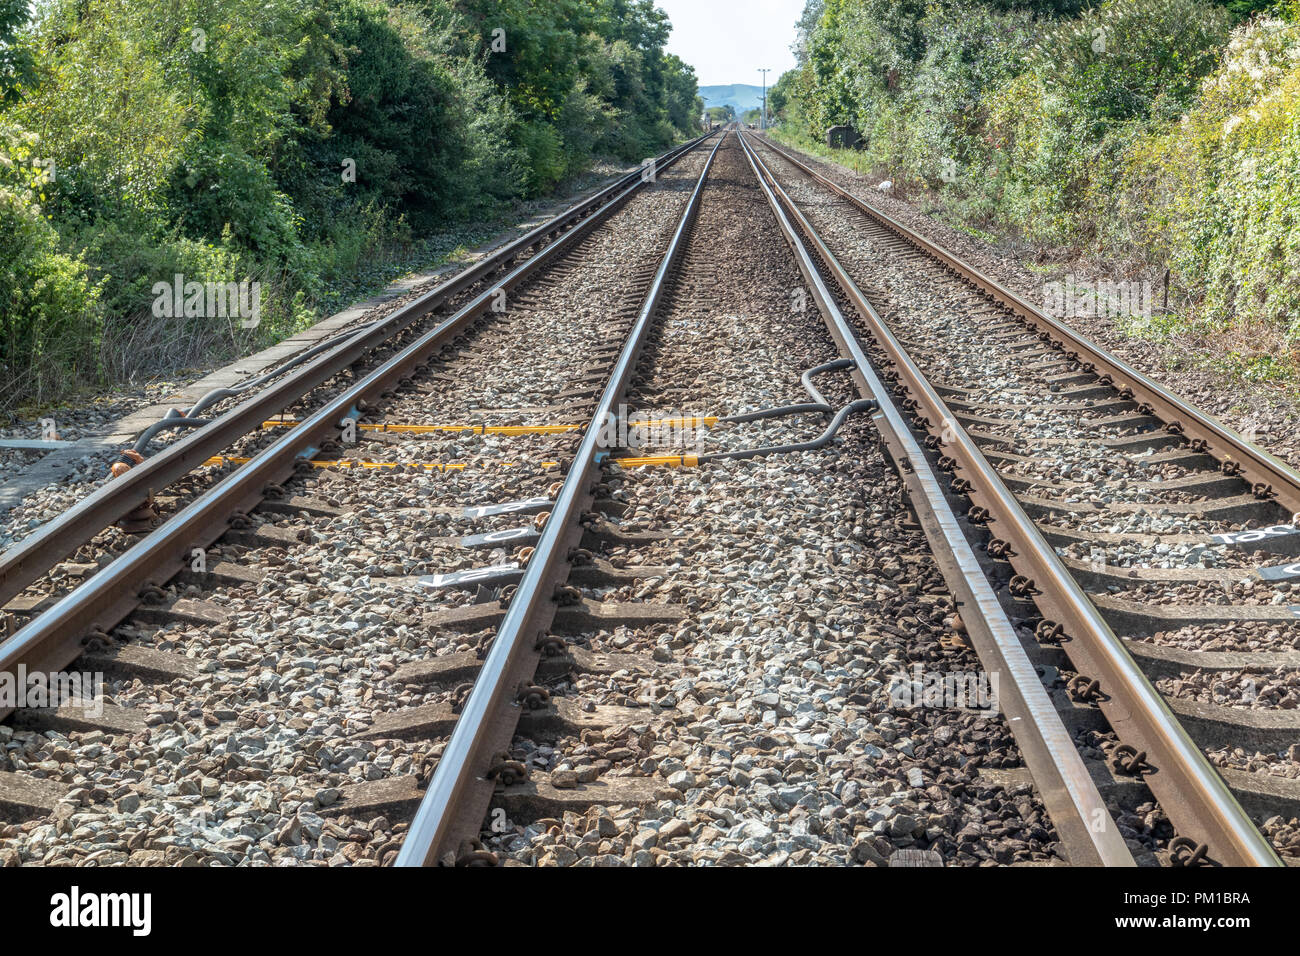 Railway tracks, showing the third rail system as used in the south of the England. Stock Photo